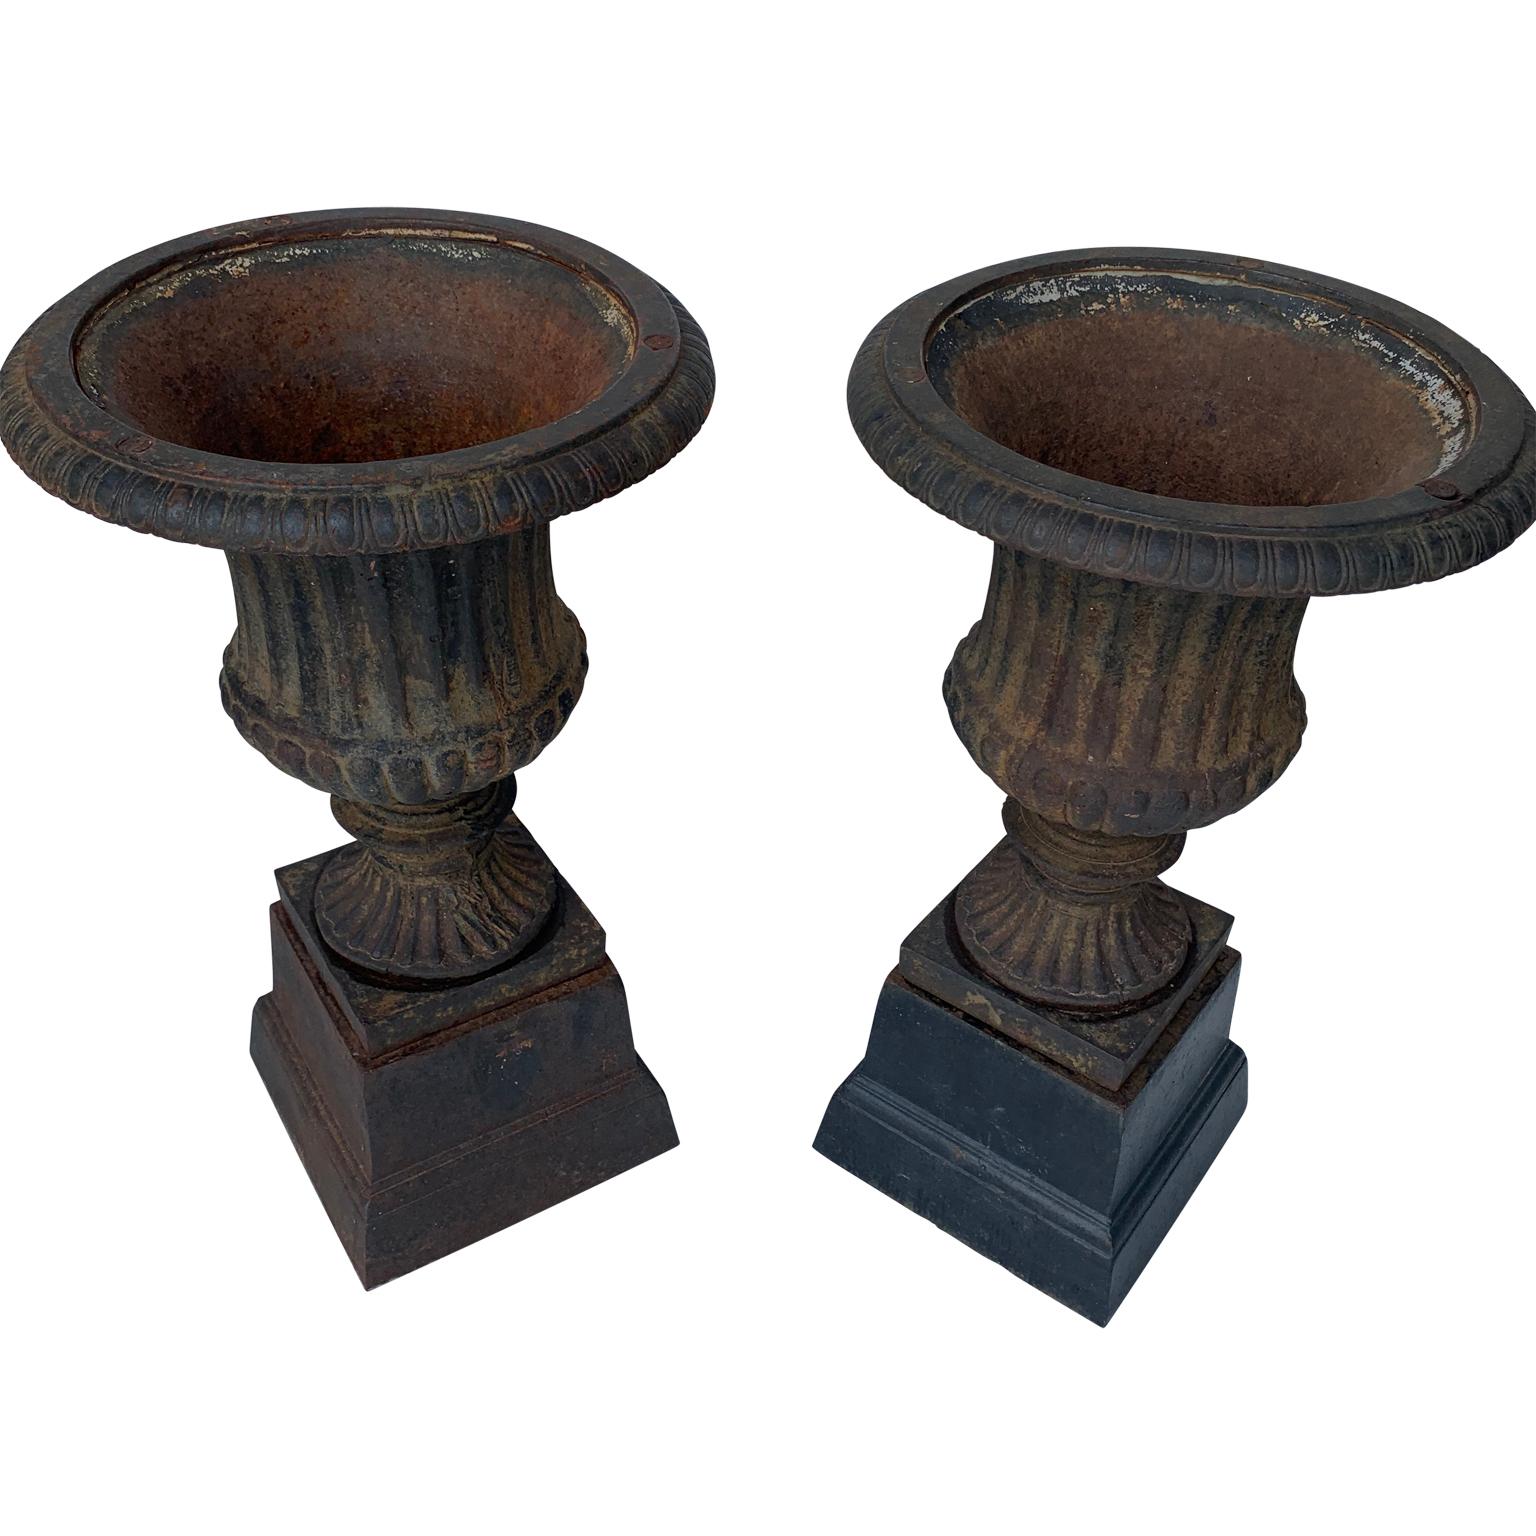 American Pair Of Small Late 19th Century Cast Iron Urns On Stands